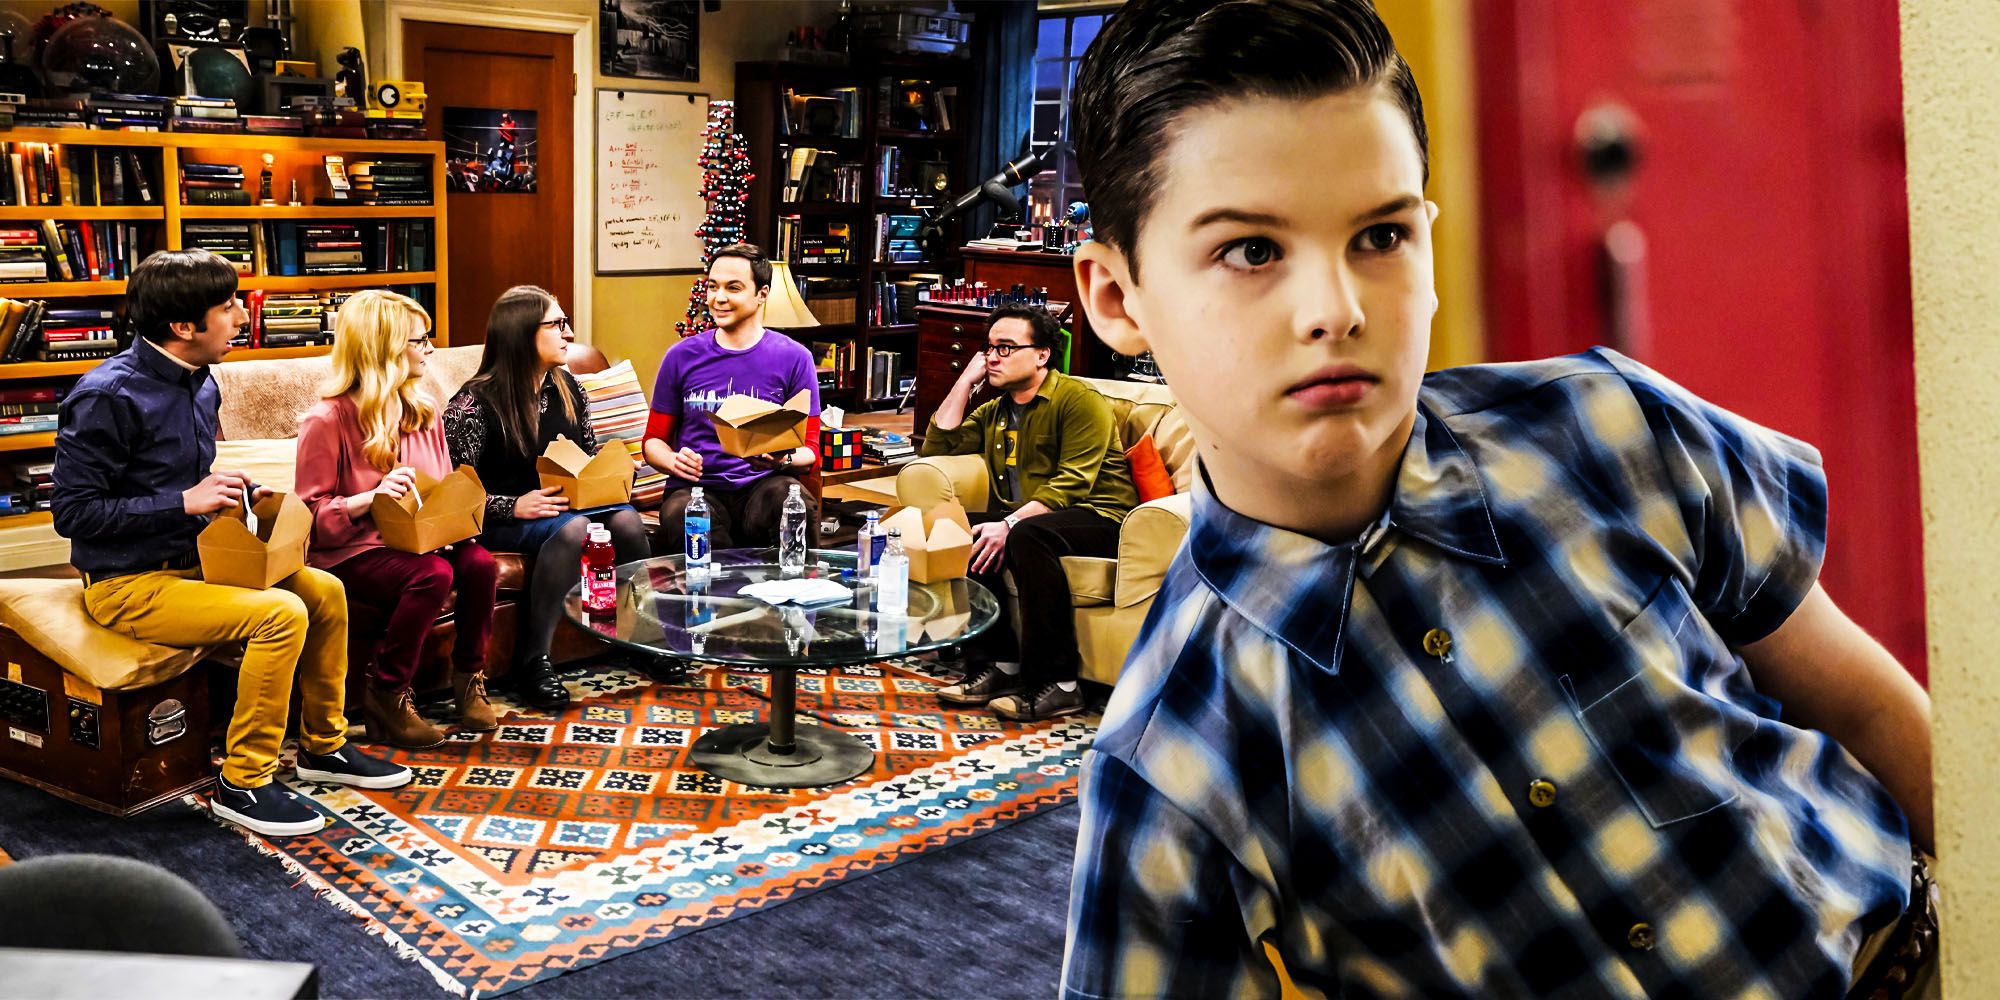 Young sheldon reversed one big bang theory mistake multi camera laugh track